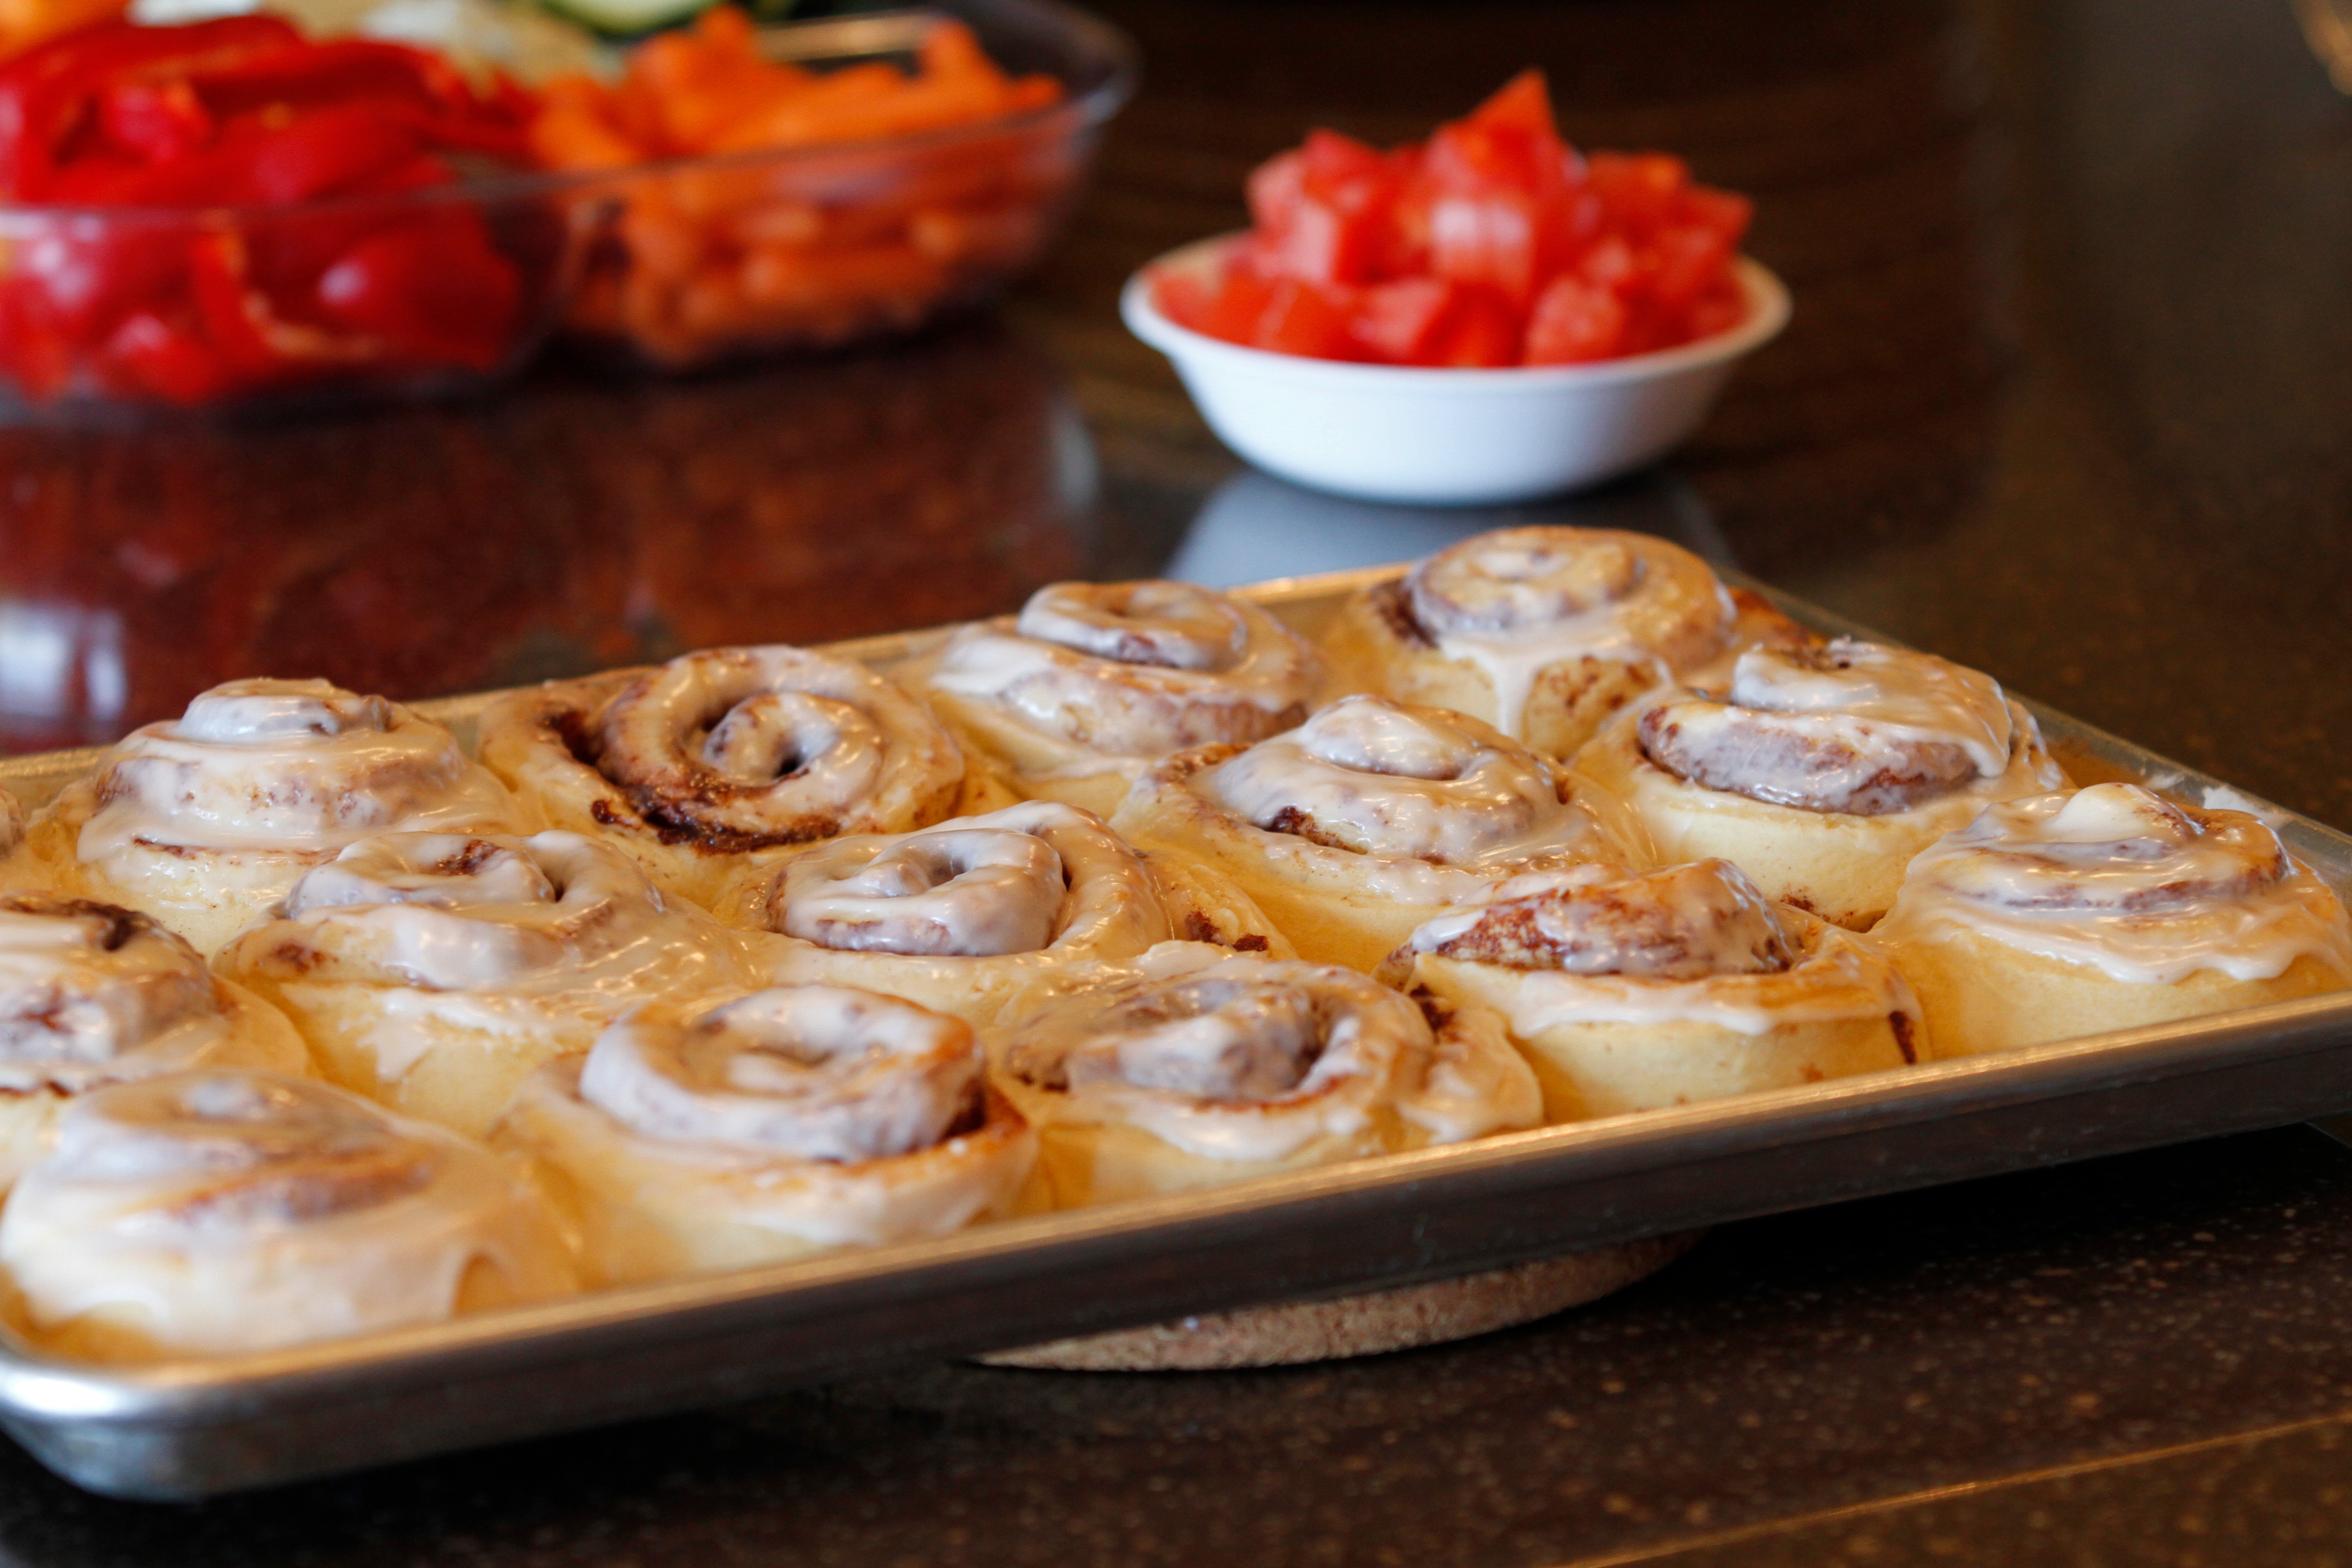 A pan of hot cinnamon rolls with icing on top, melting.